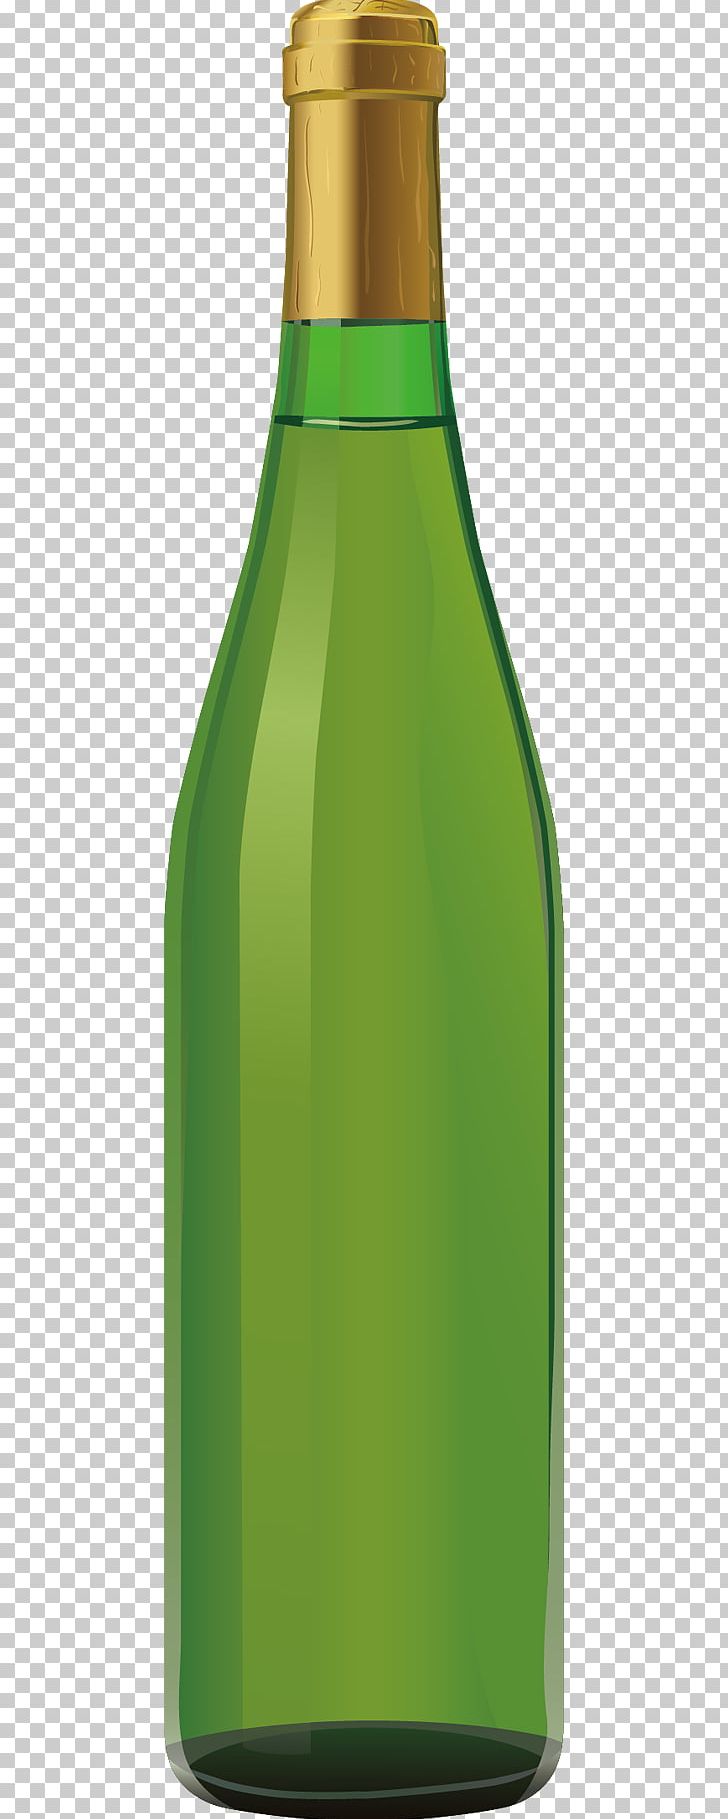 Beer Bottle Champagne Glass Bottle PNG, Clipart, Alcoholic Beverage, Beer, Beer Bottle, Beer Glass, Beers Free PNG Download